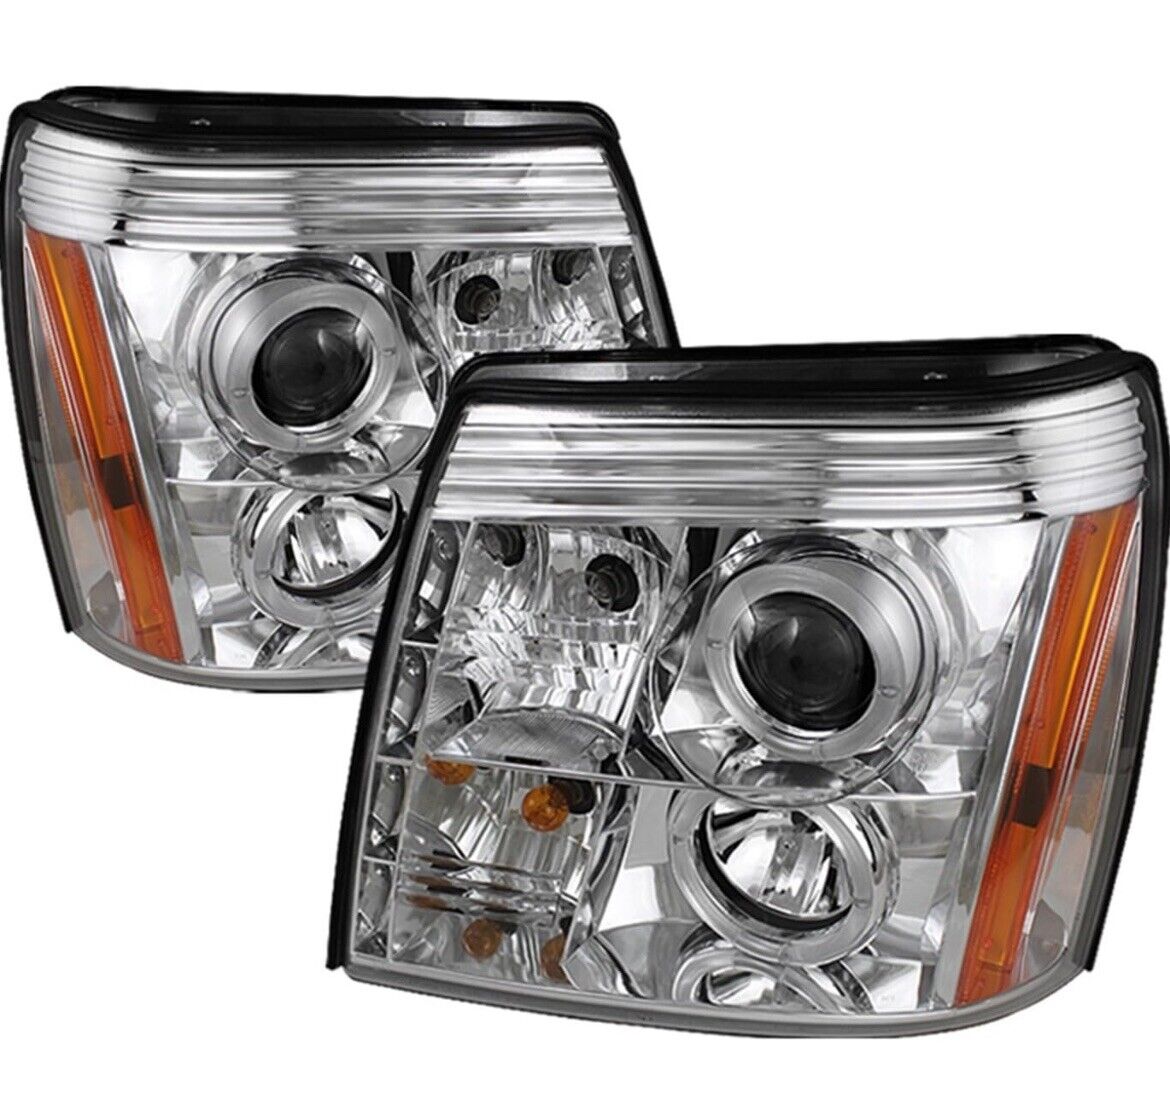 Spyder Halo DRL LED Projector Headlights Set for 03-06 Cadillac Escalade 5042279